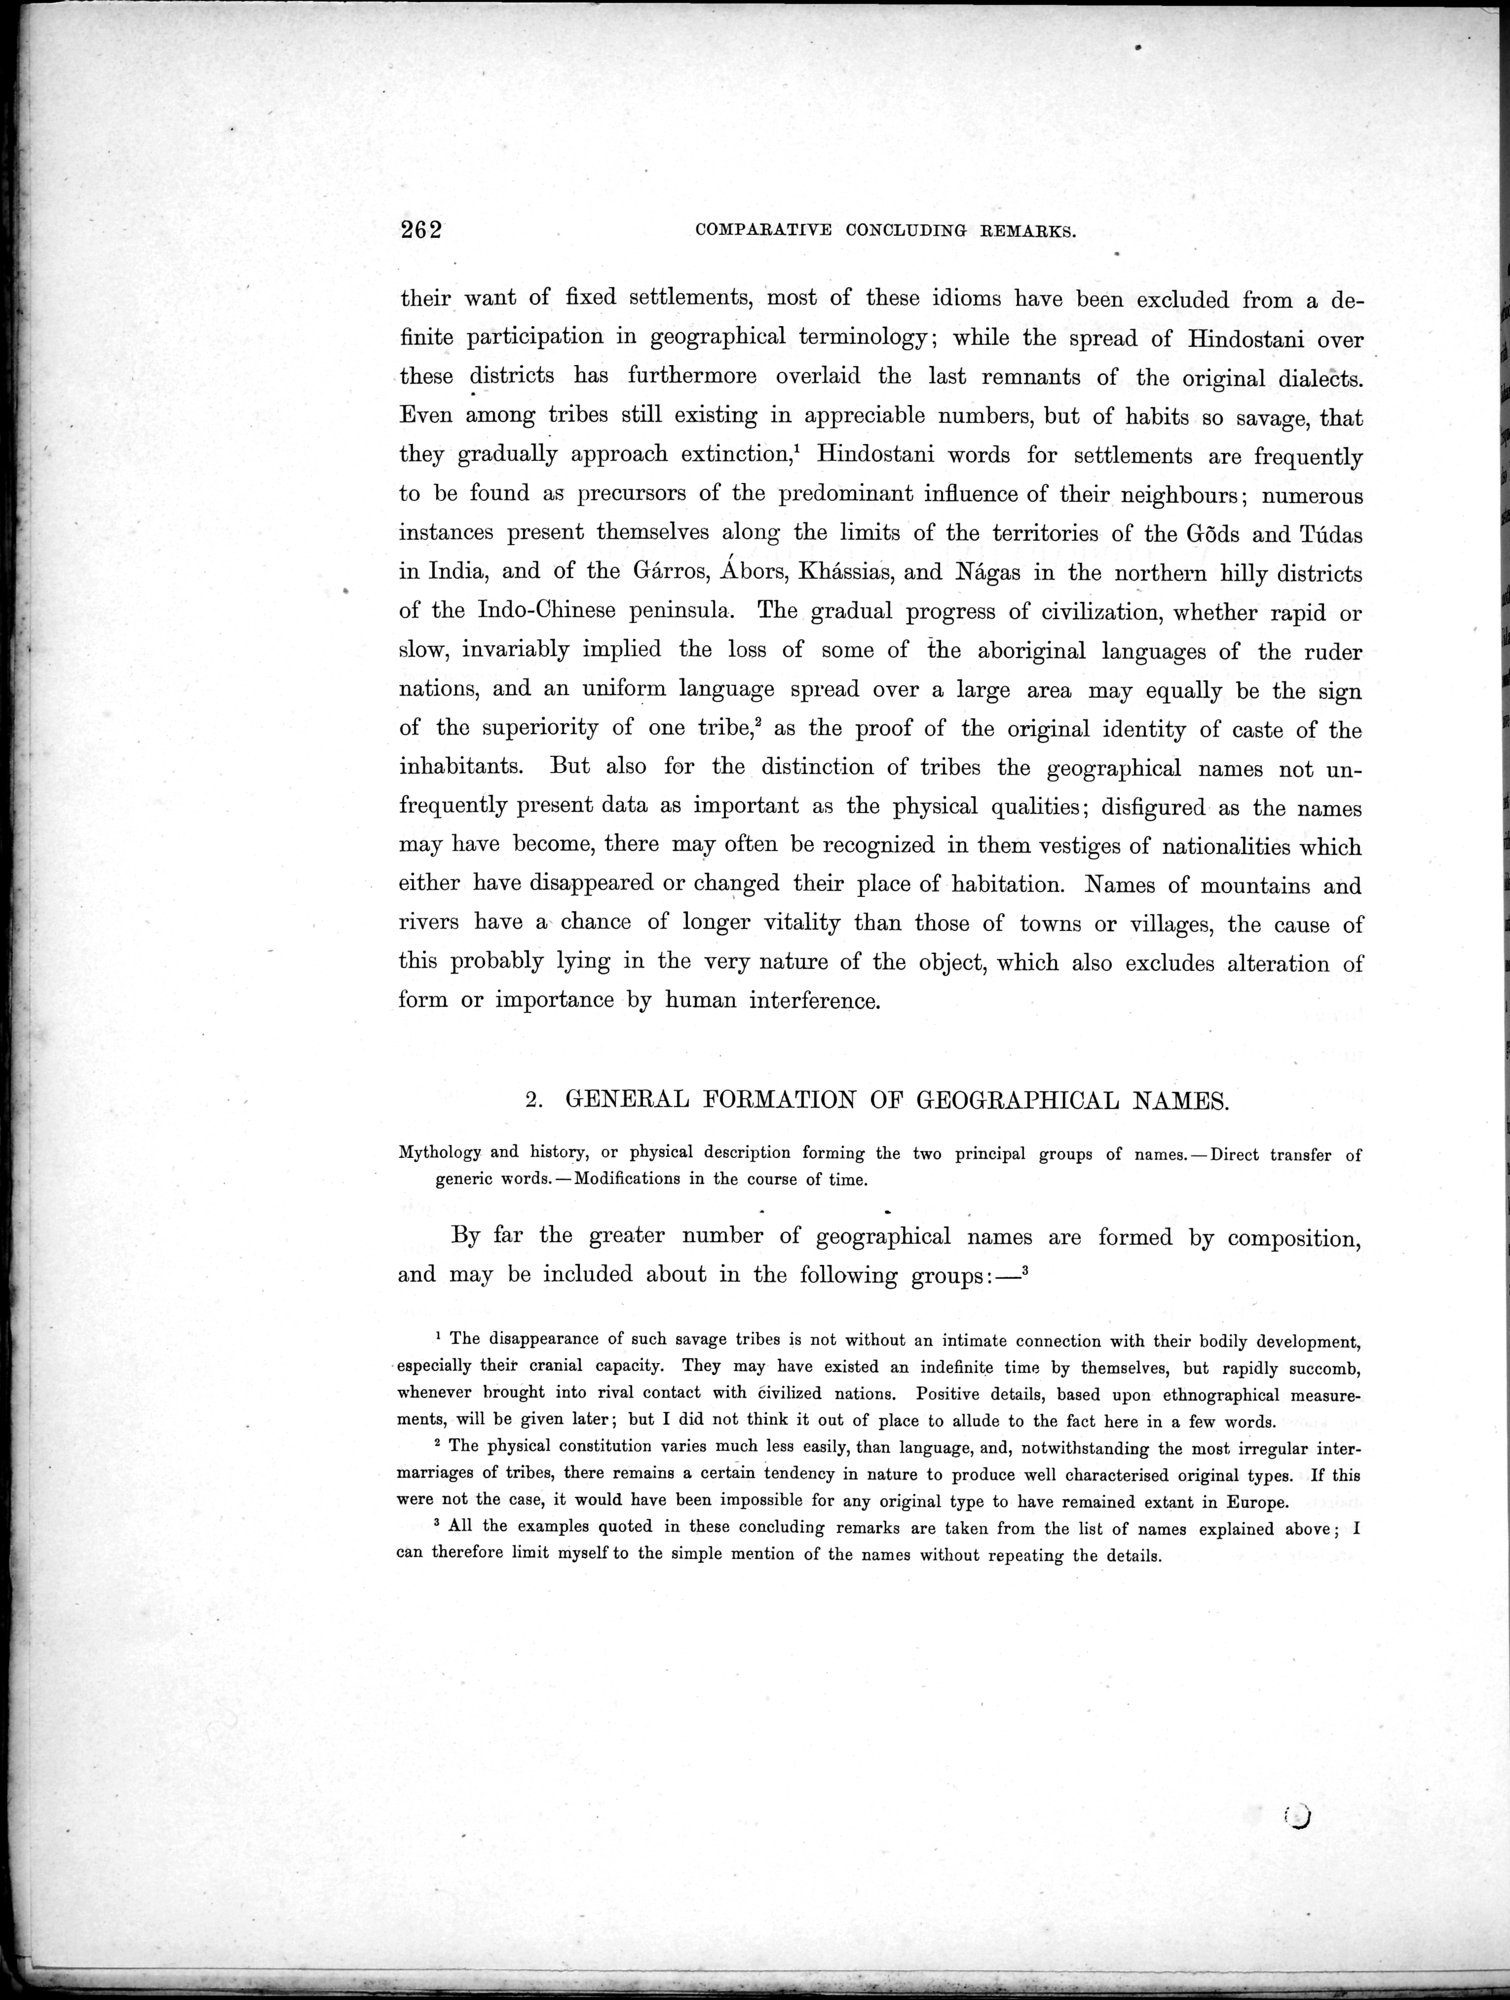 Results of a Scientific Mission to India and High Asia : vol.3 / Page 294 (Grayscale High Resolution Image)